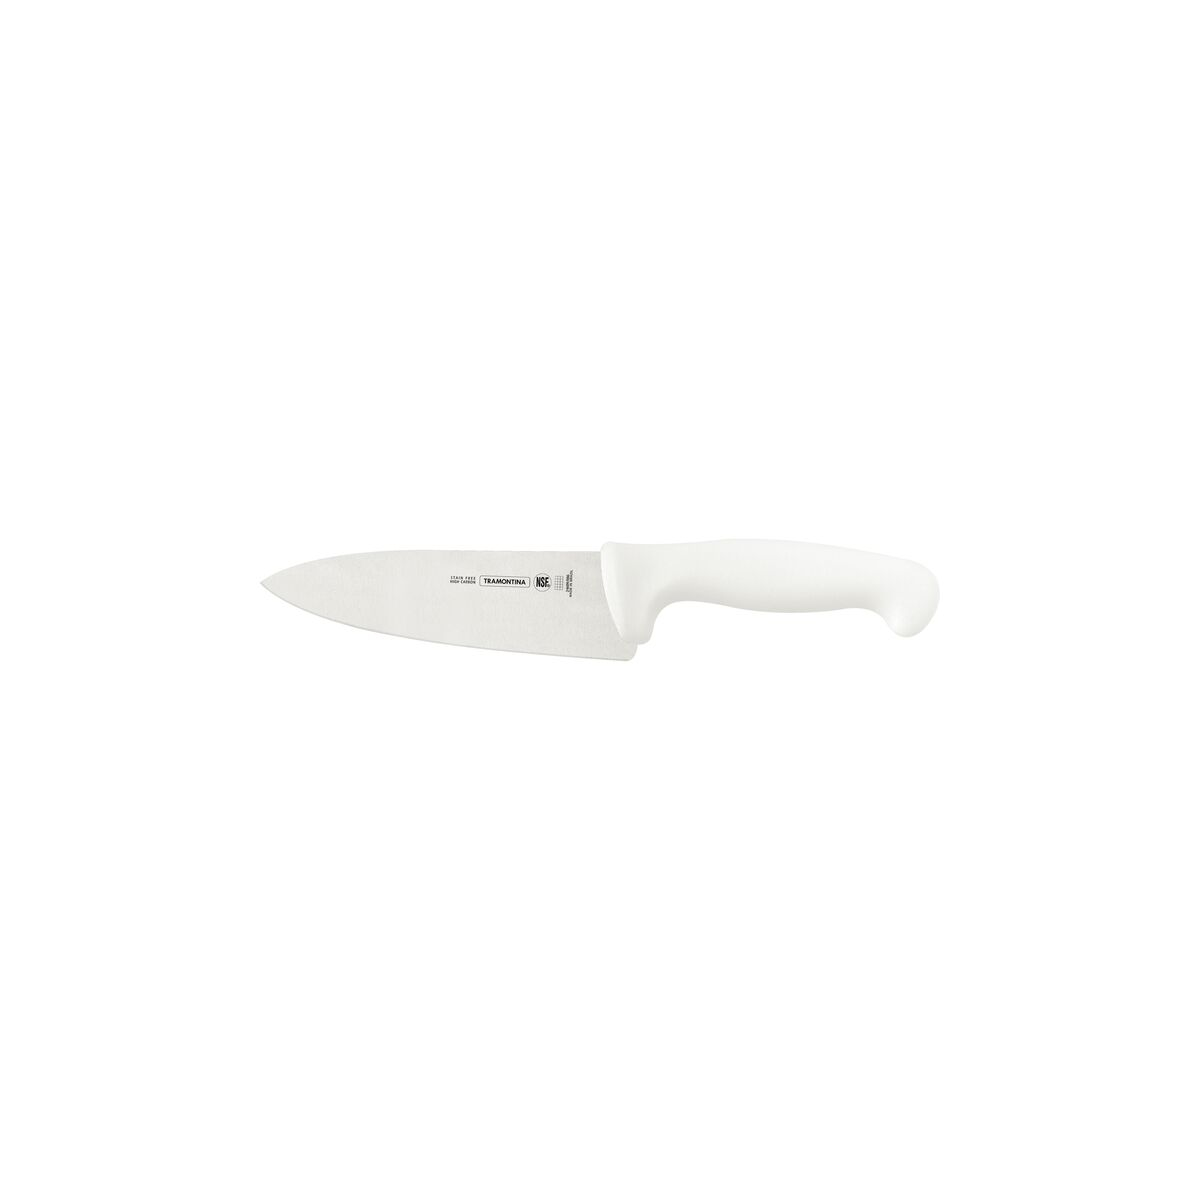 Tramontina Professional 6" Meat Knife with Stainless-Steel Blade and White Polypropylene Handle